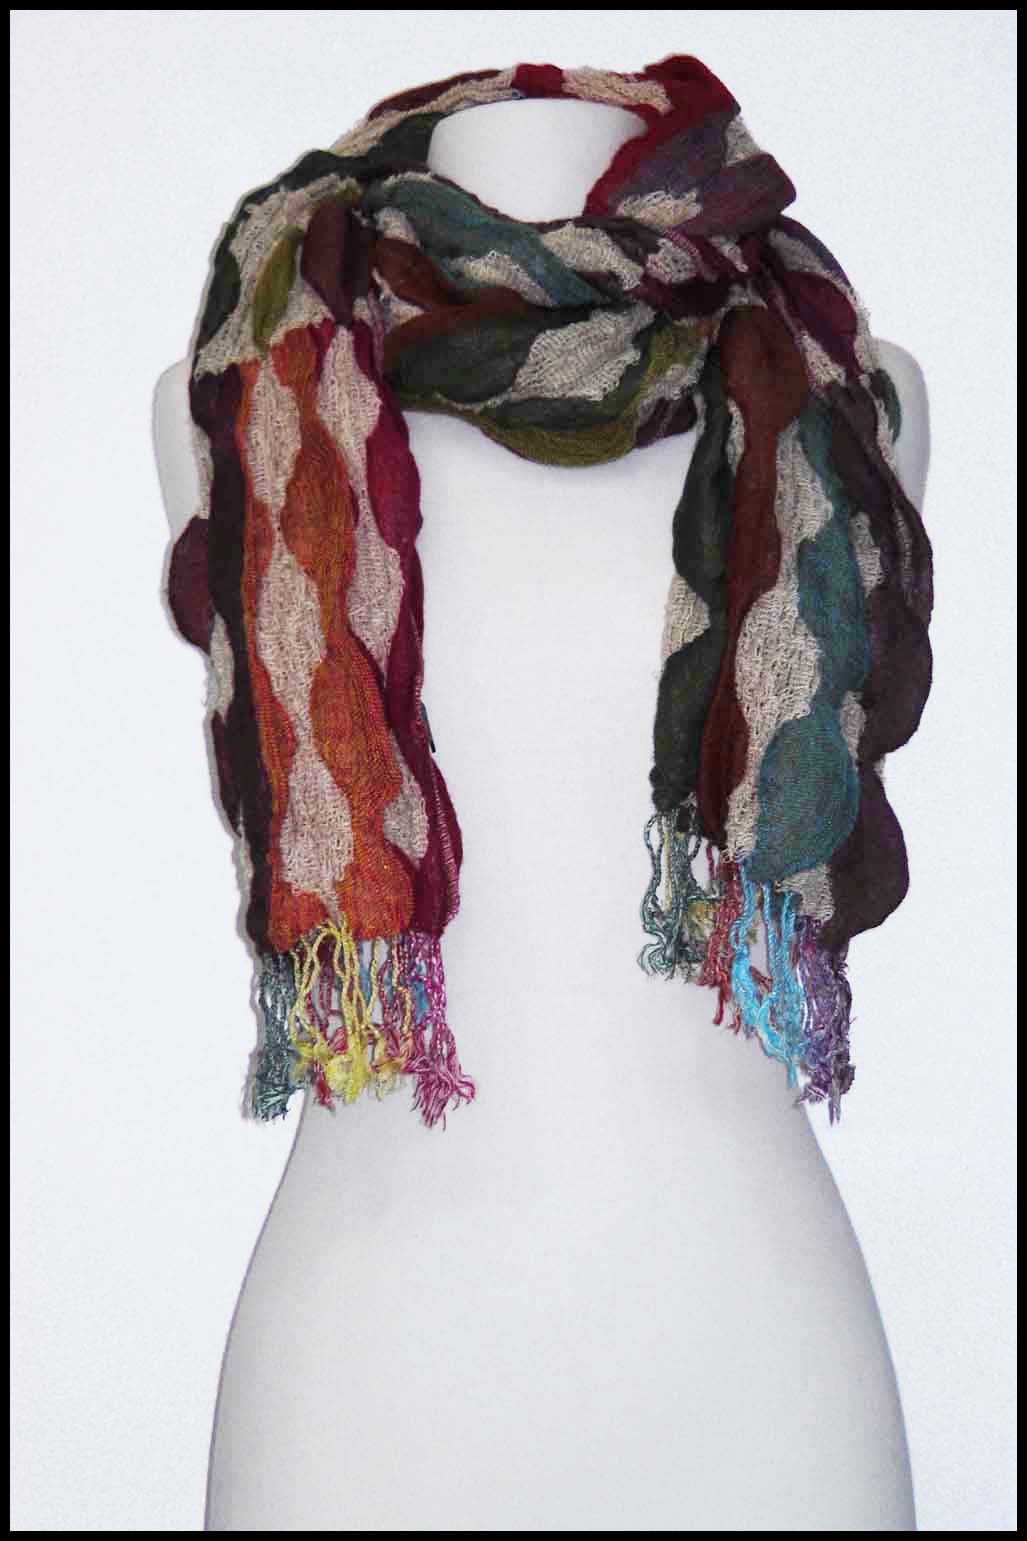 Whimsical Diamond-patterned Stretch Scarf